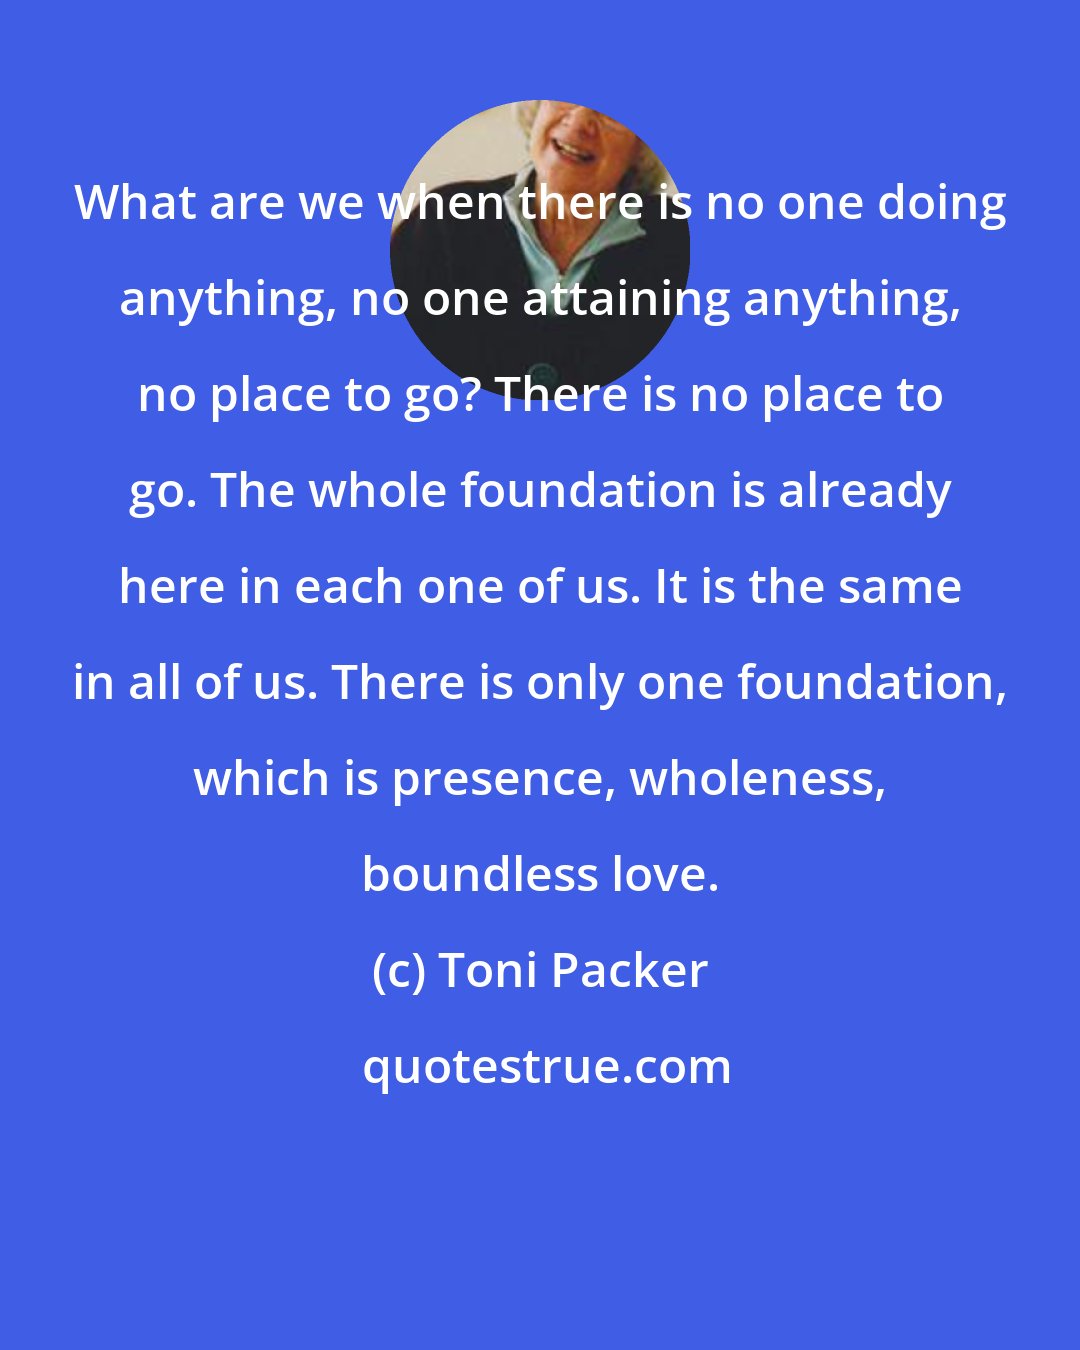 Toni Packer: What are we when there is no one doing anything, no one attaining anything, no place to go? There is no place to go. The whole foundation is already here in each one of us. It is the same in all of us. There is only one foundation, which is presence, wholeness, boundless love.